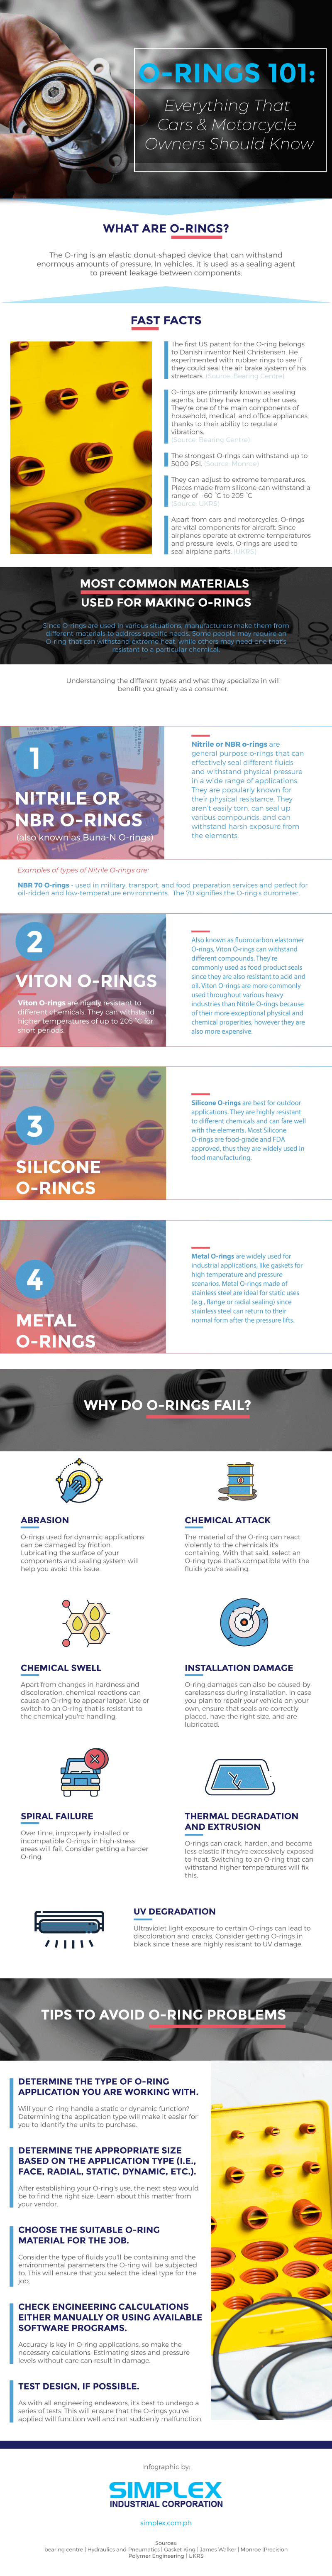 Leading Provider of O-Rings, Oil Seals, and Related Sealing Products | A  leading provider of o-rings, oil seals and sealing related products